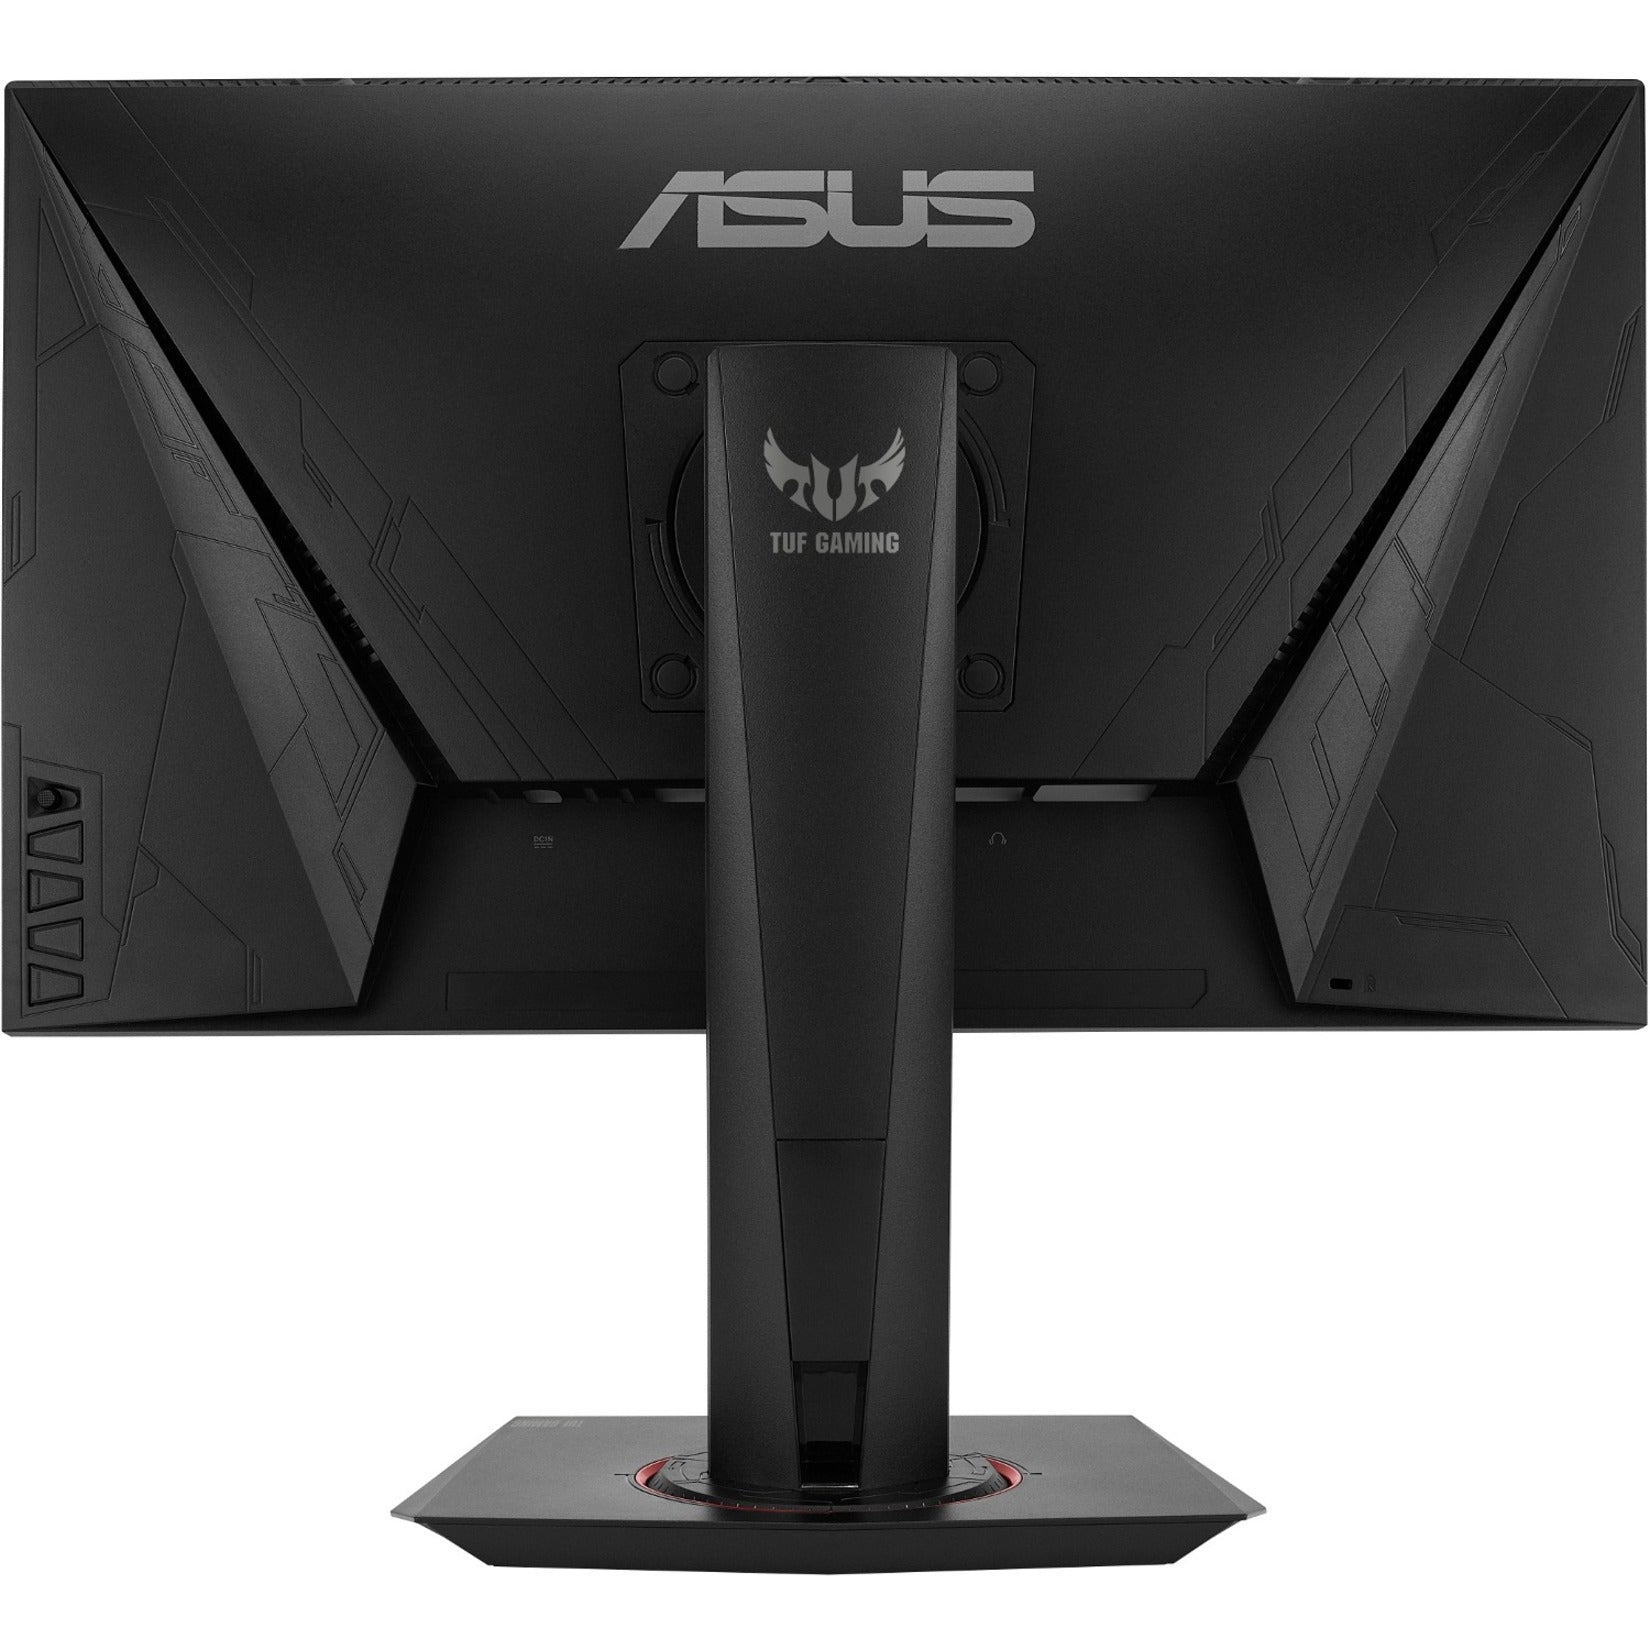 ASUS VG259QM TUF Gaming LCD Monitor, 24.5" Full HD, 240Hz Refresh Rate, G-sync Compatible